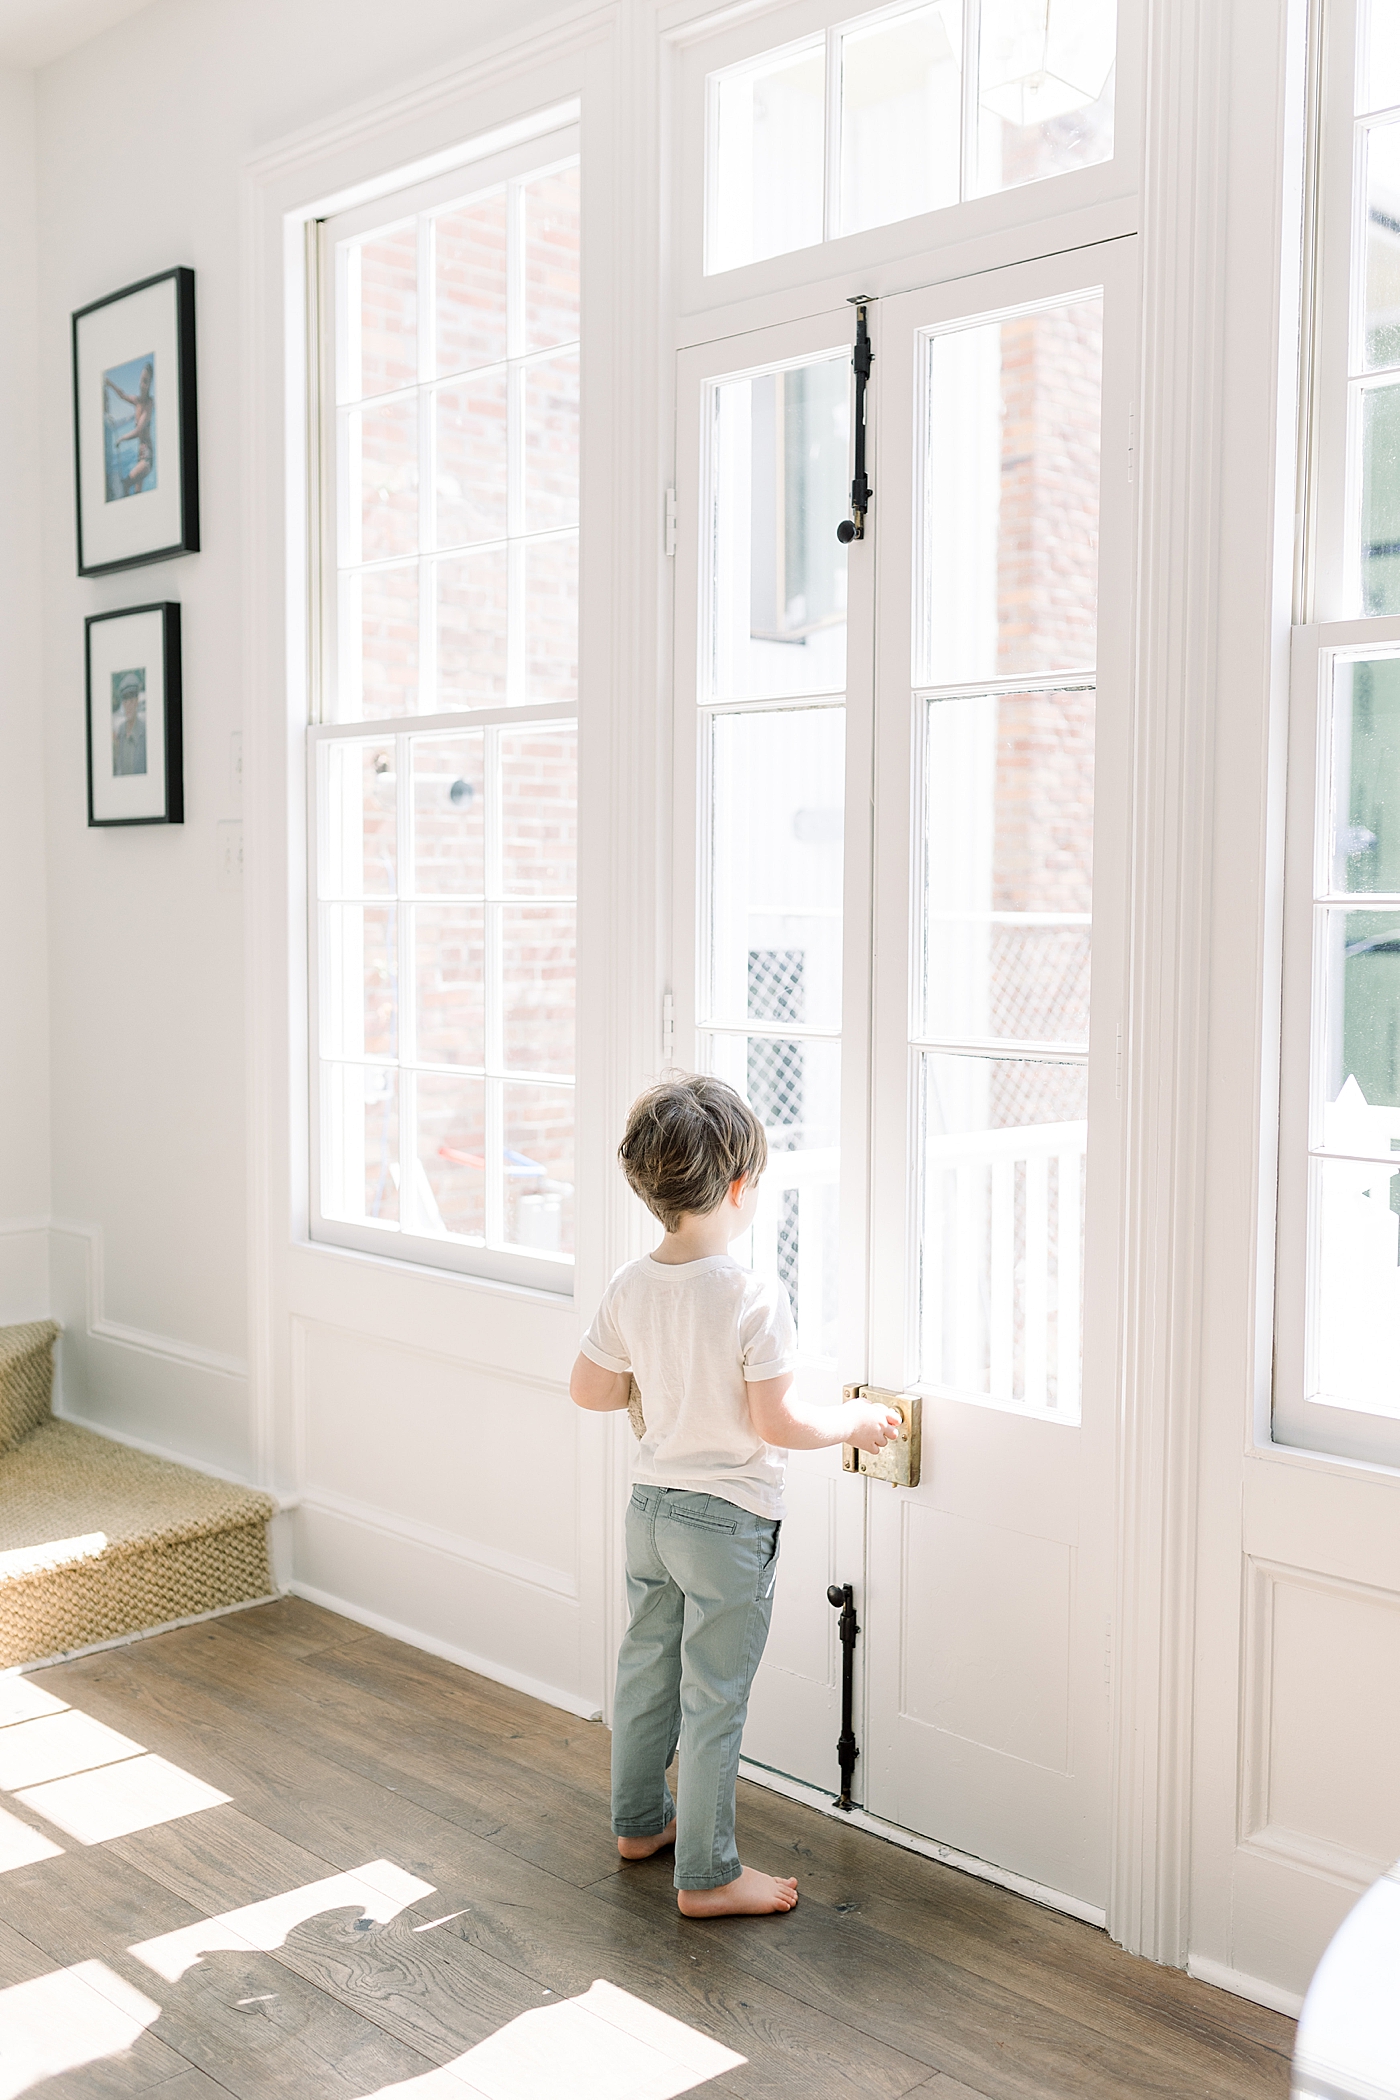 Young boy, barefoot looking out a glass door on a sunny day | Image by Caitlyn Motycka 